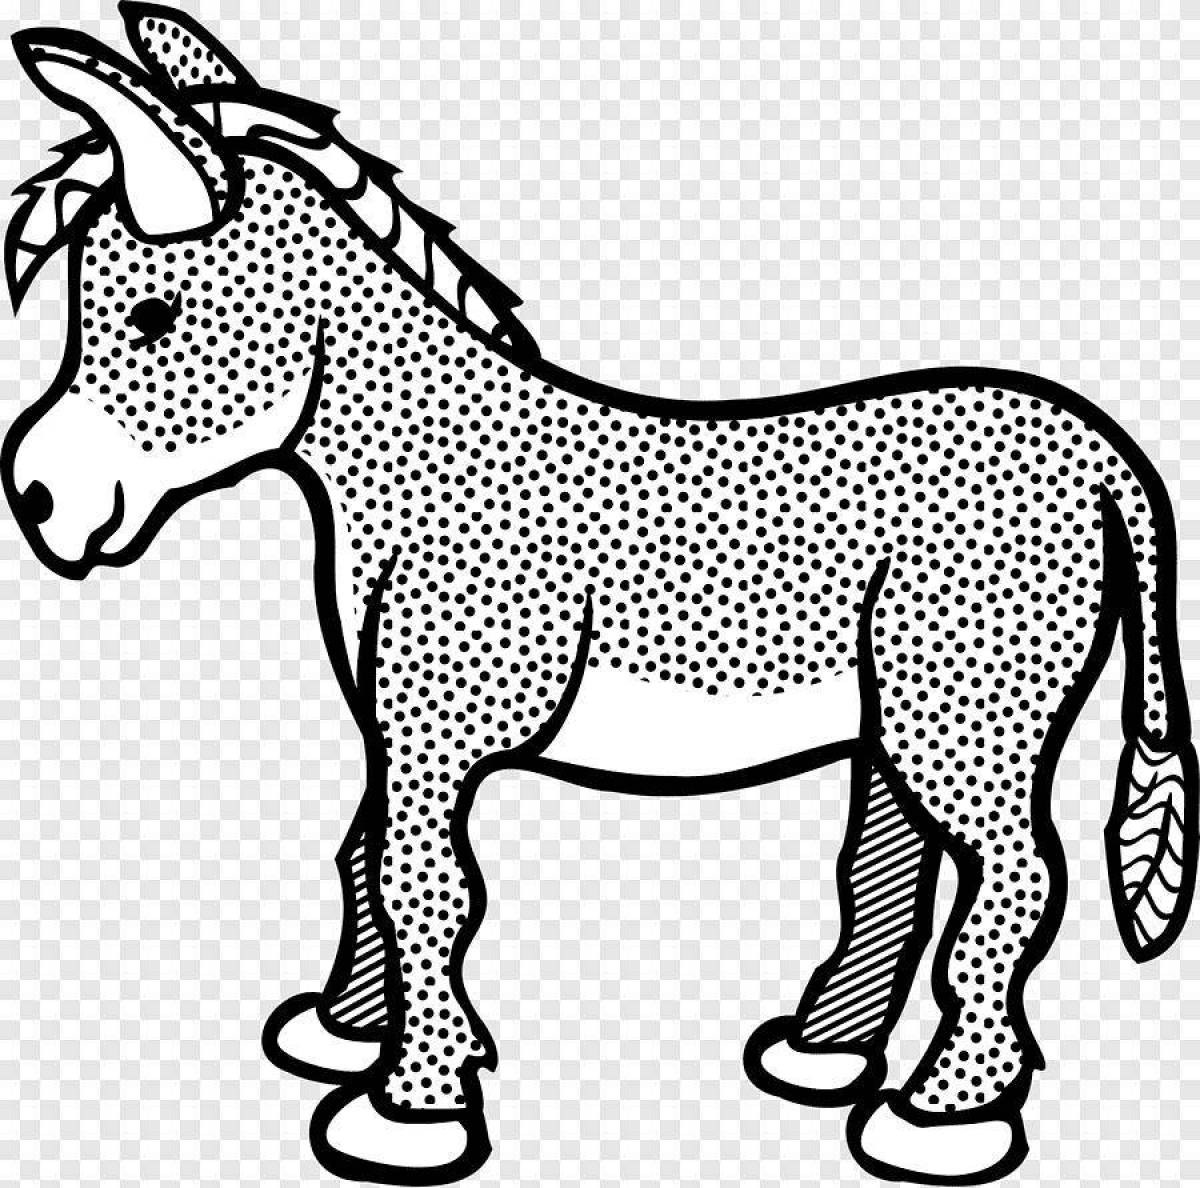 Amazing donkey coloring book for kids